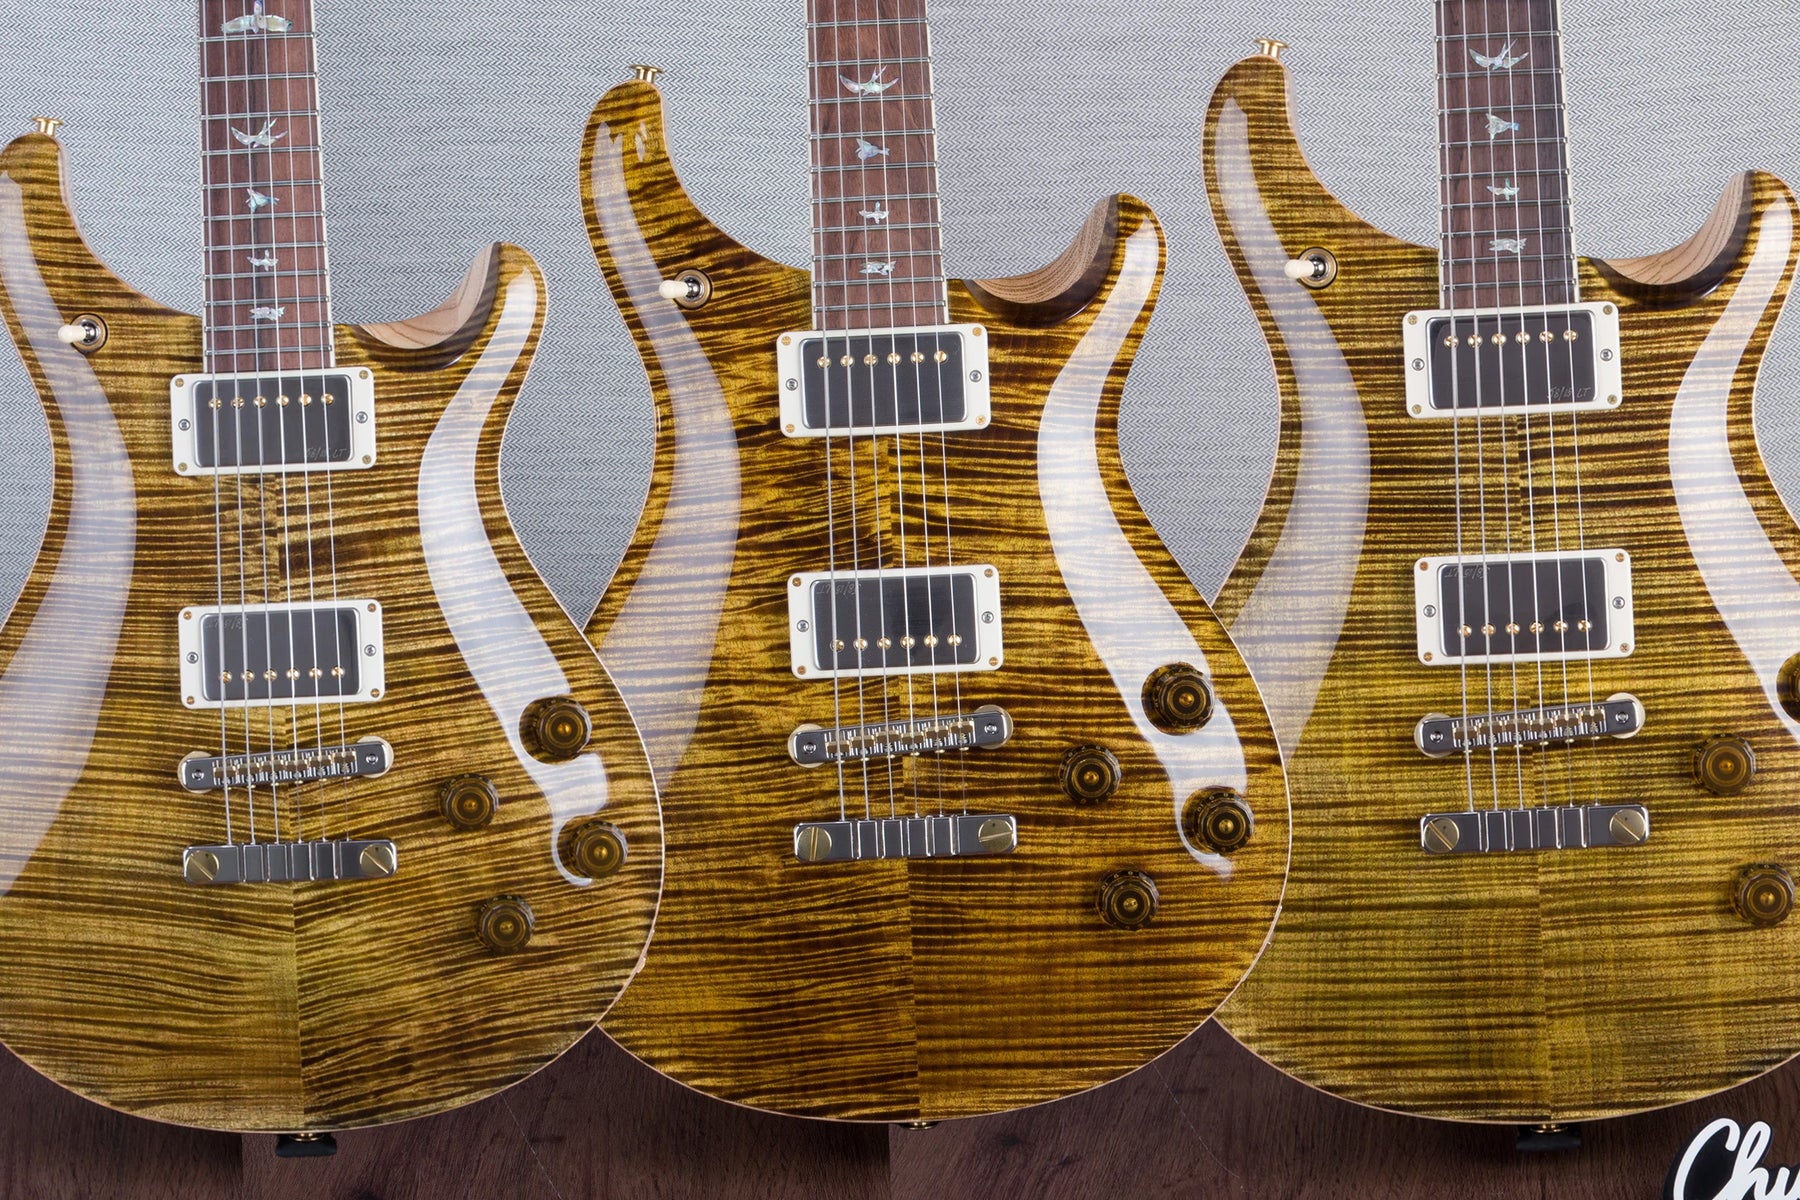 Just arrived - CHUCKSCLUSIVE PRS Wood Library Guitars!